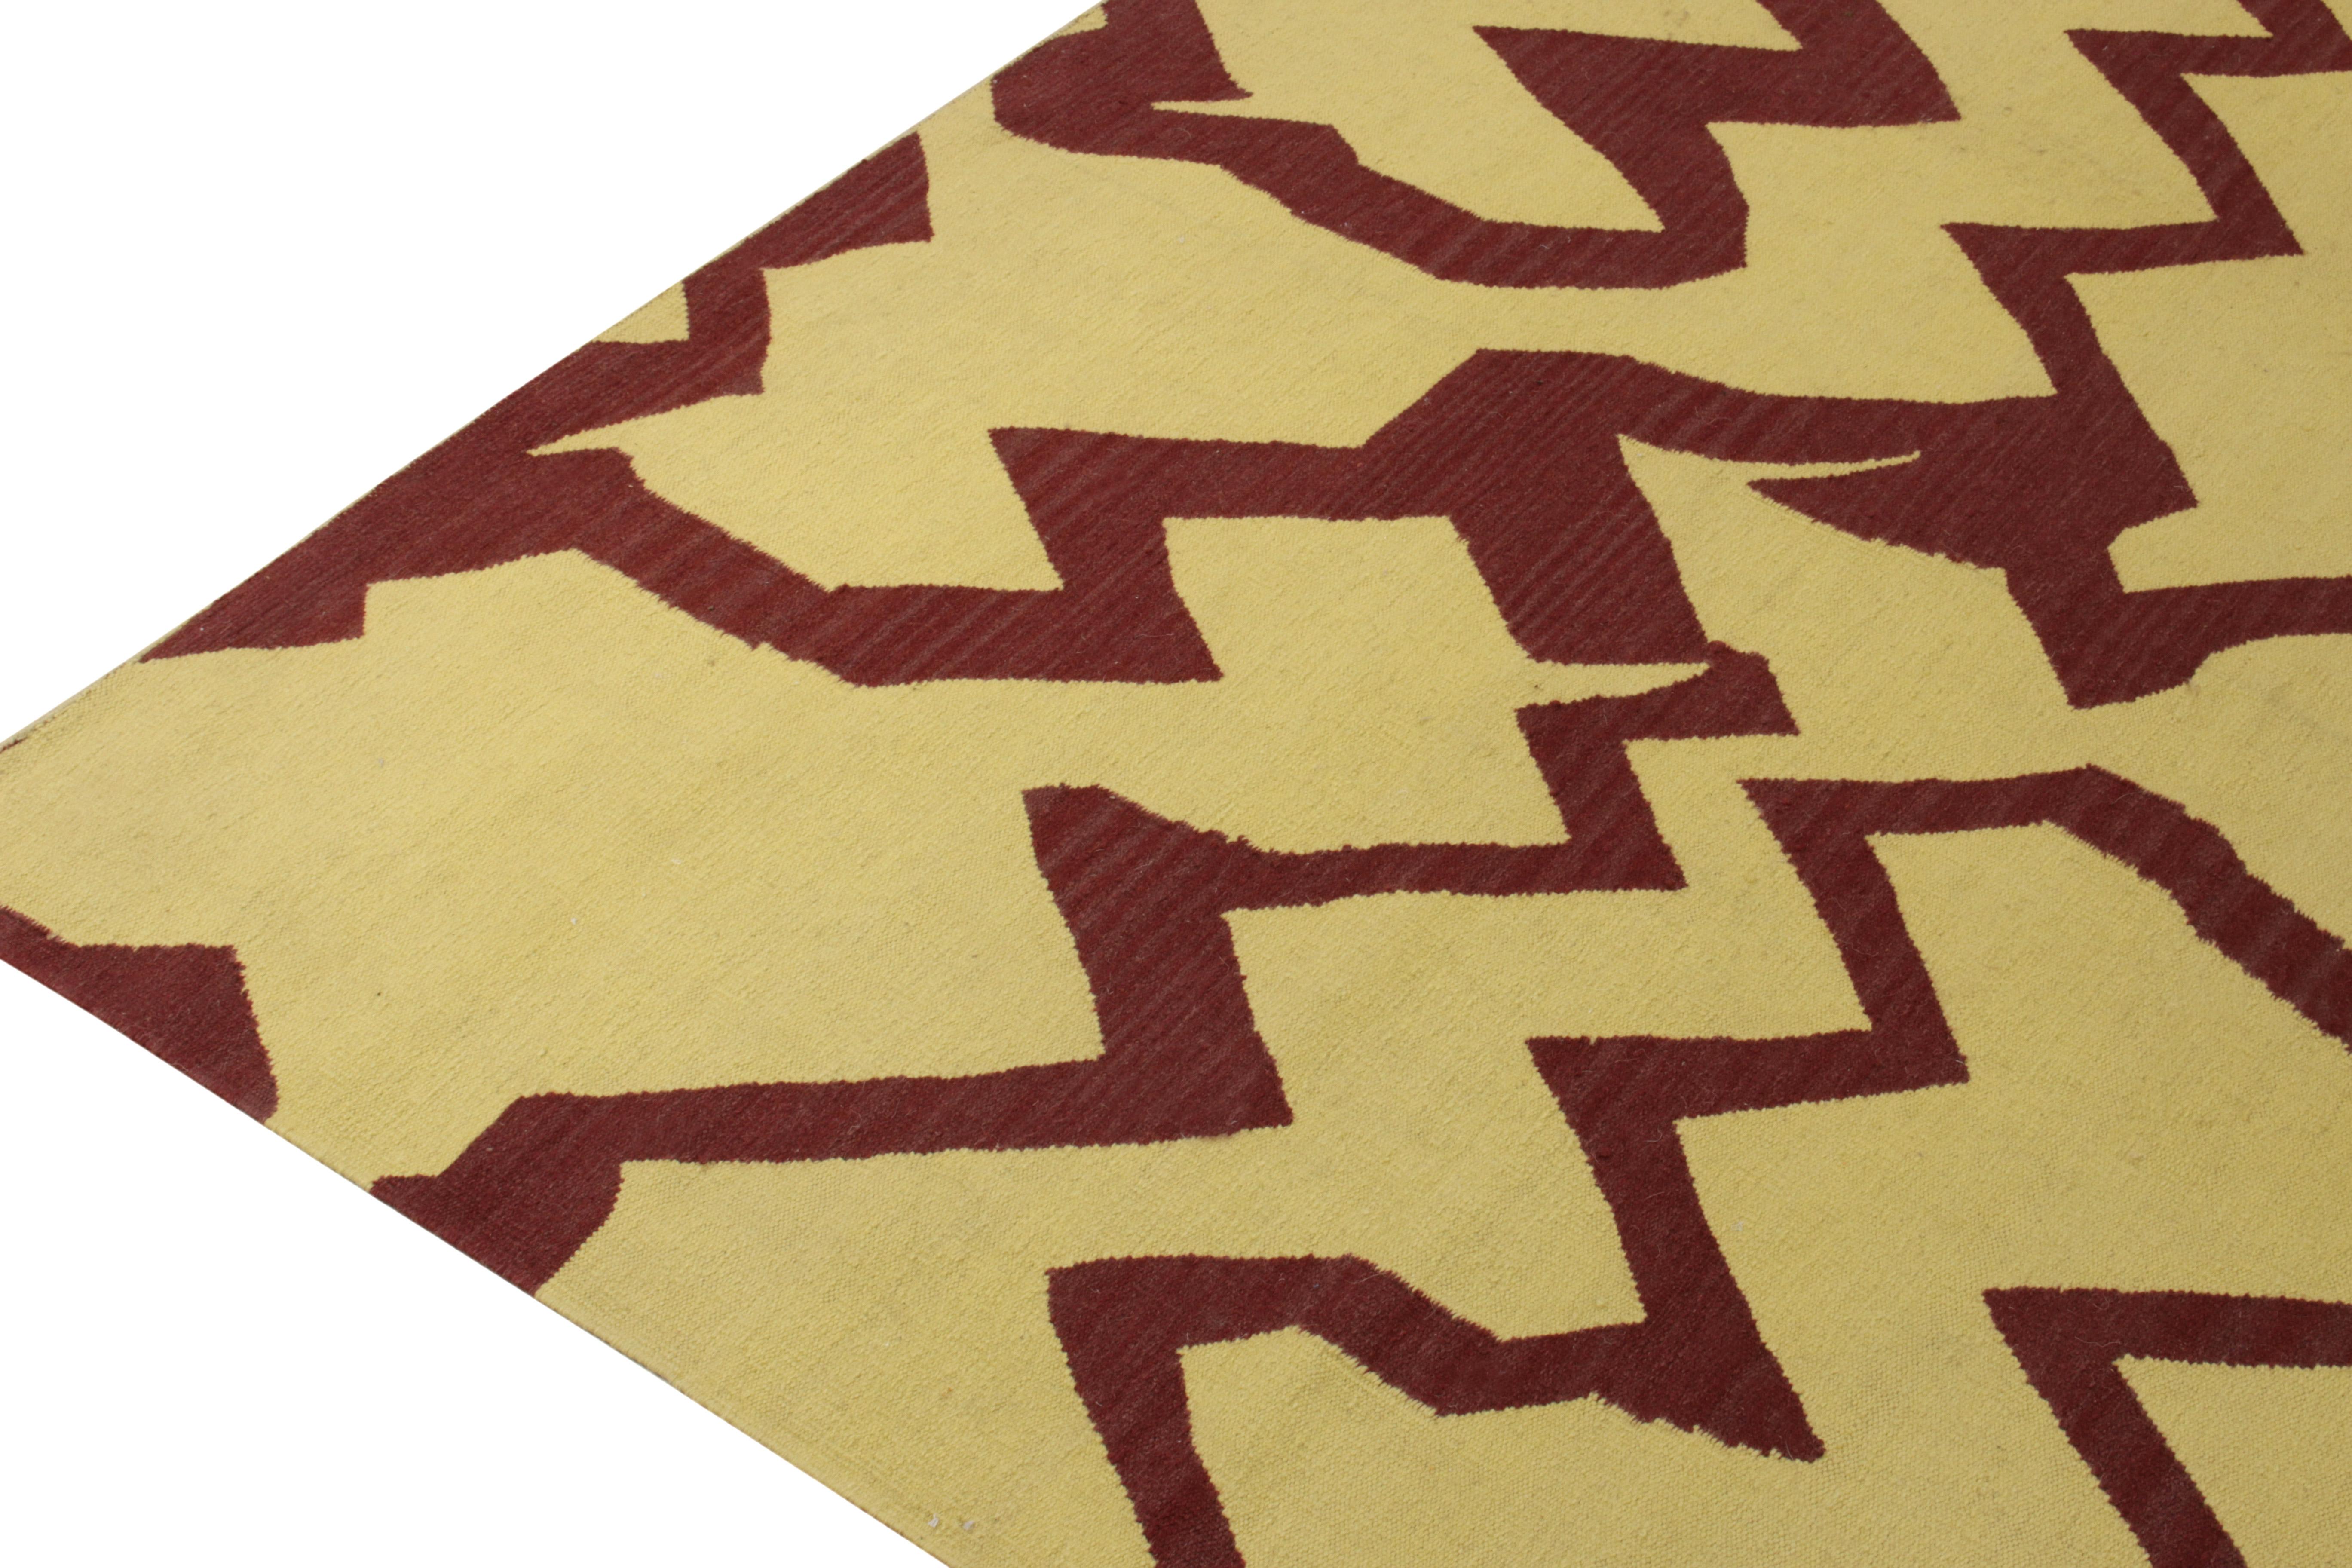 Indian Rug & Kilim's Contemporary Dhurrie Flatweave, Yellow, Maroon Geometric Pattern For Sale